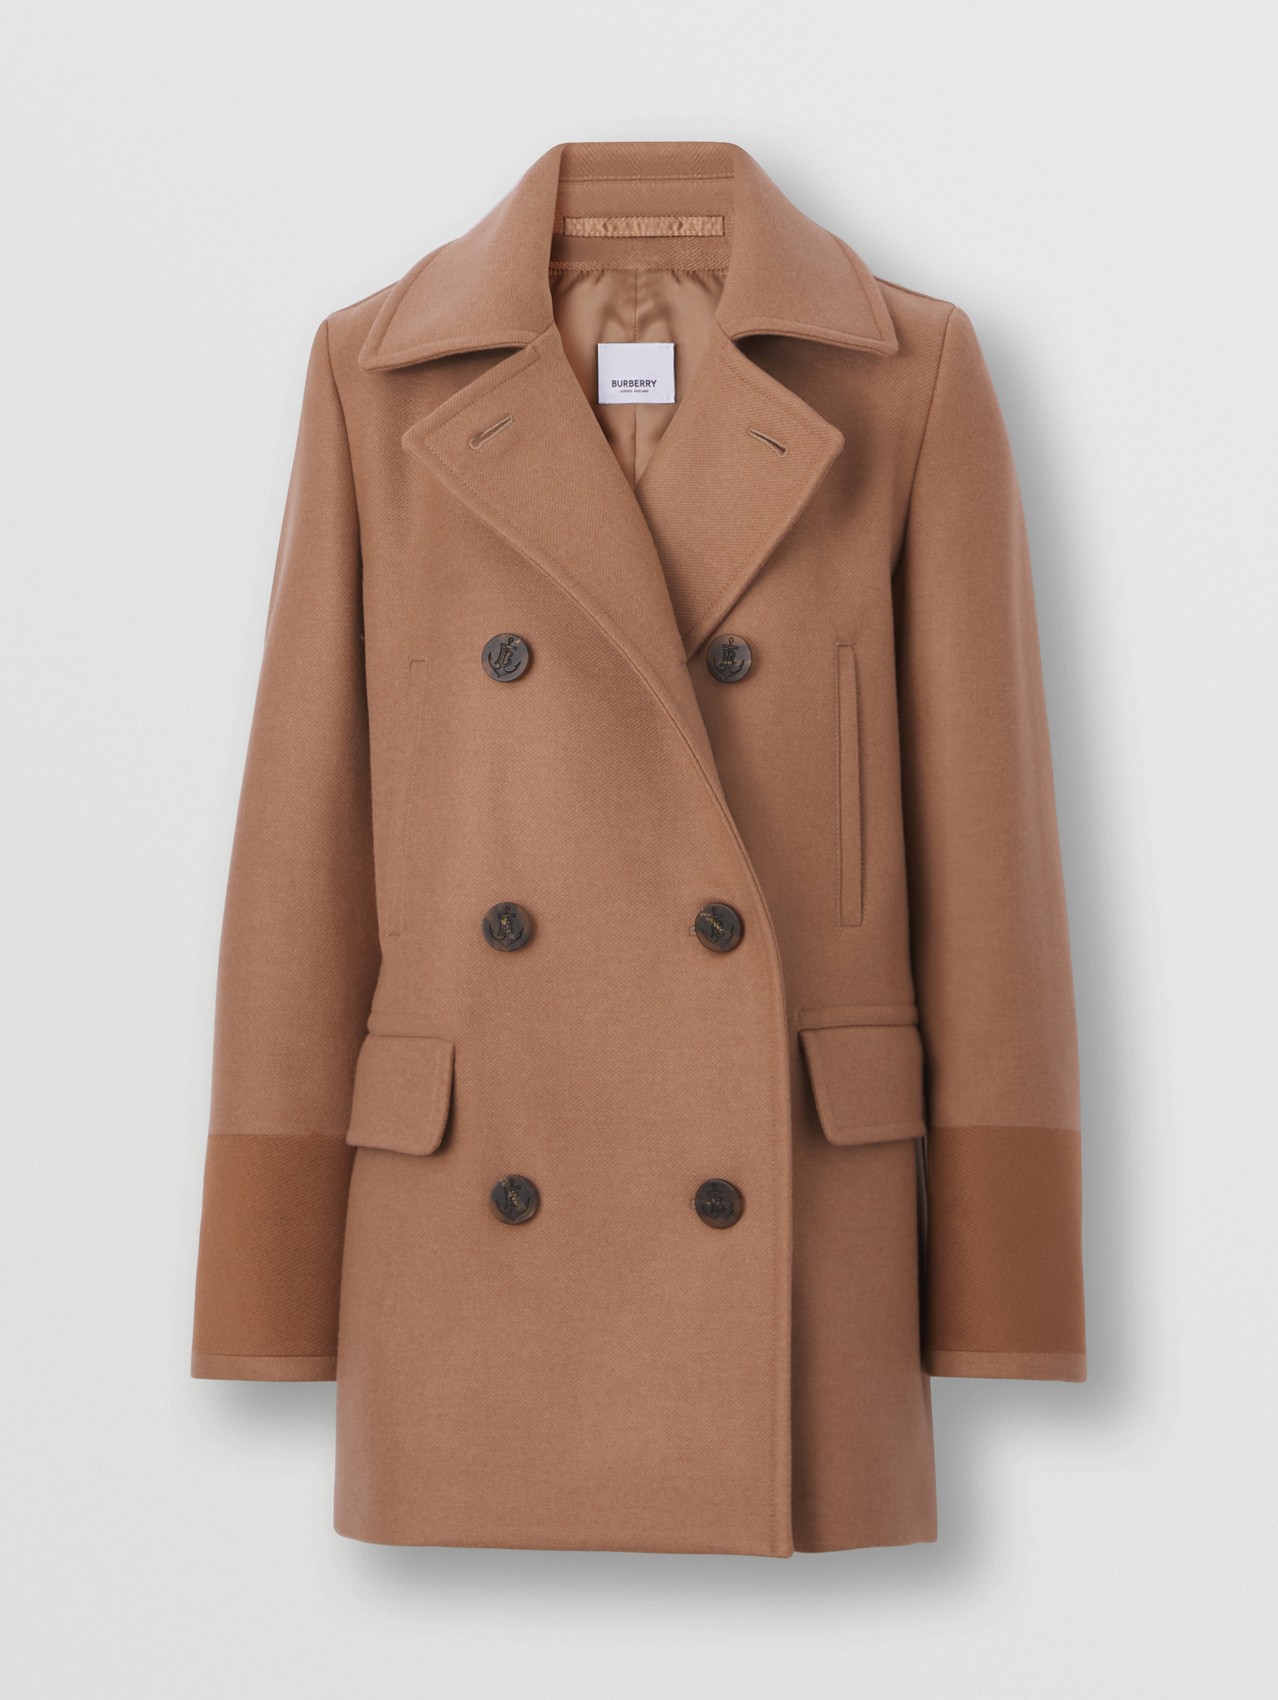 Embroidered Cuff Wool Pea Coat in Camel